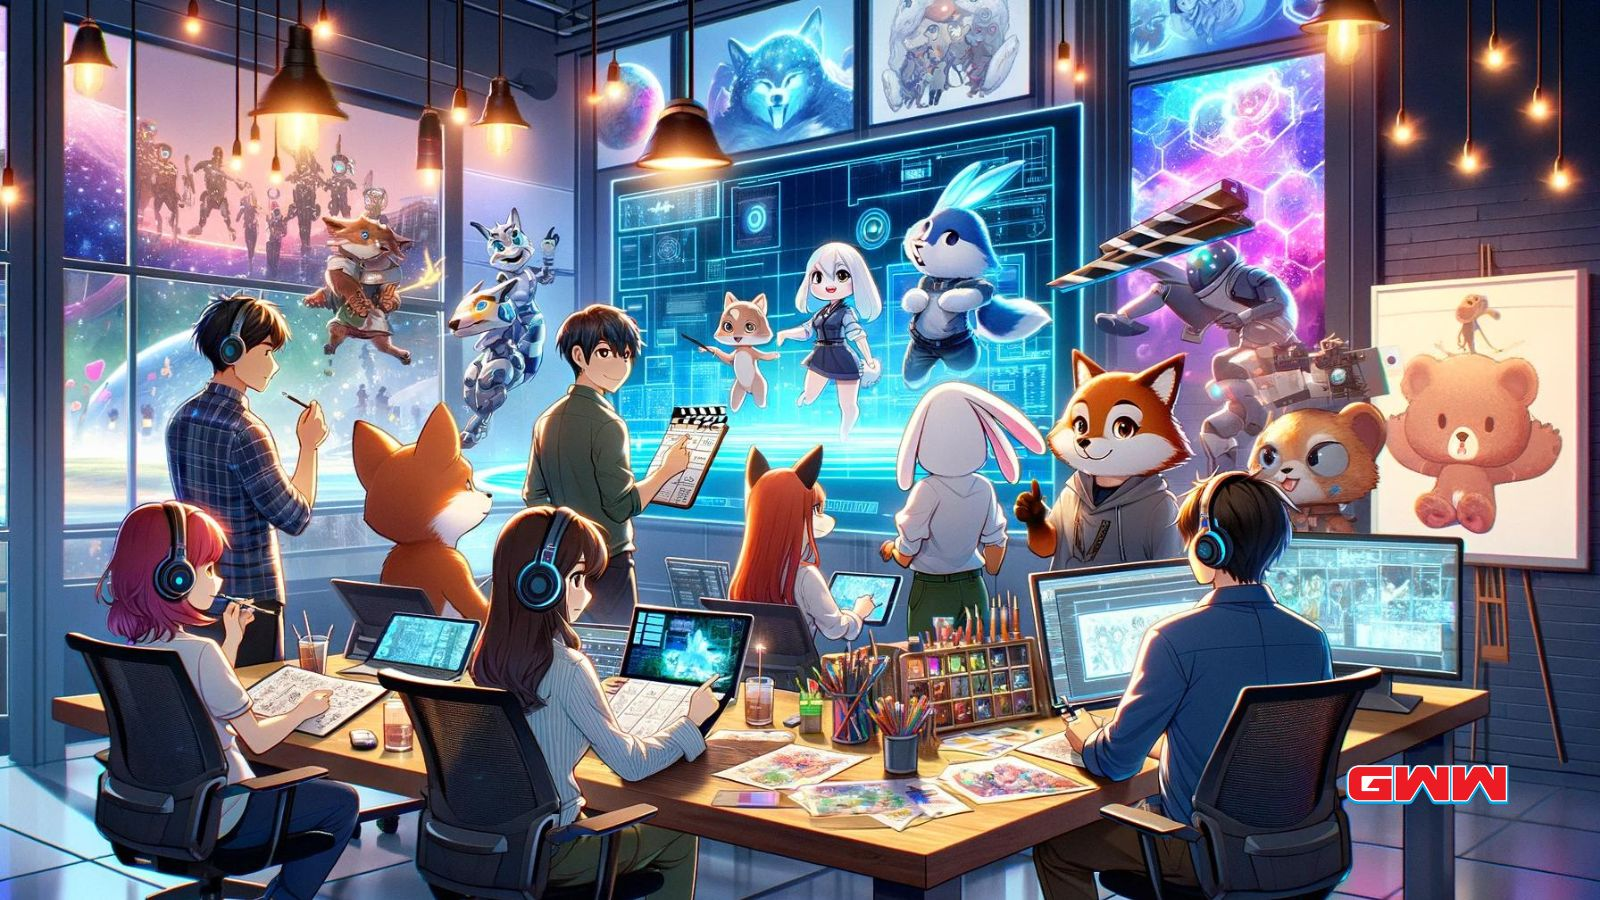 An anime-style illustration of a creative team brainstorming in a futuristic studio.